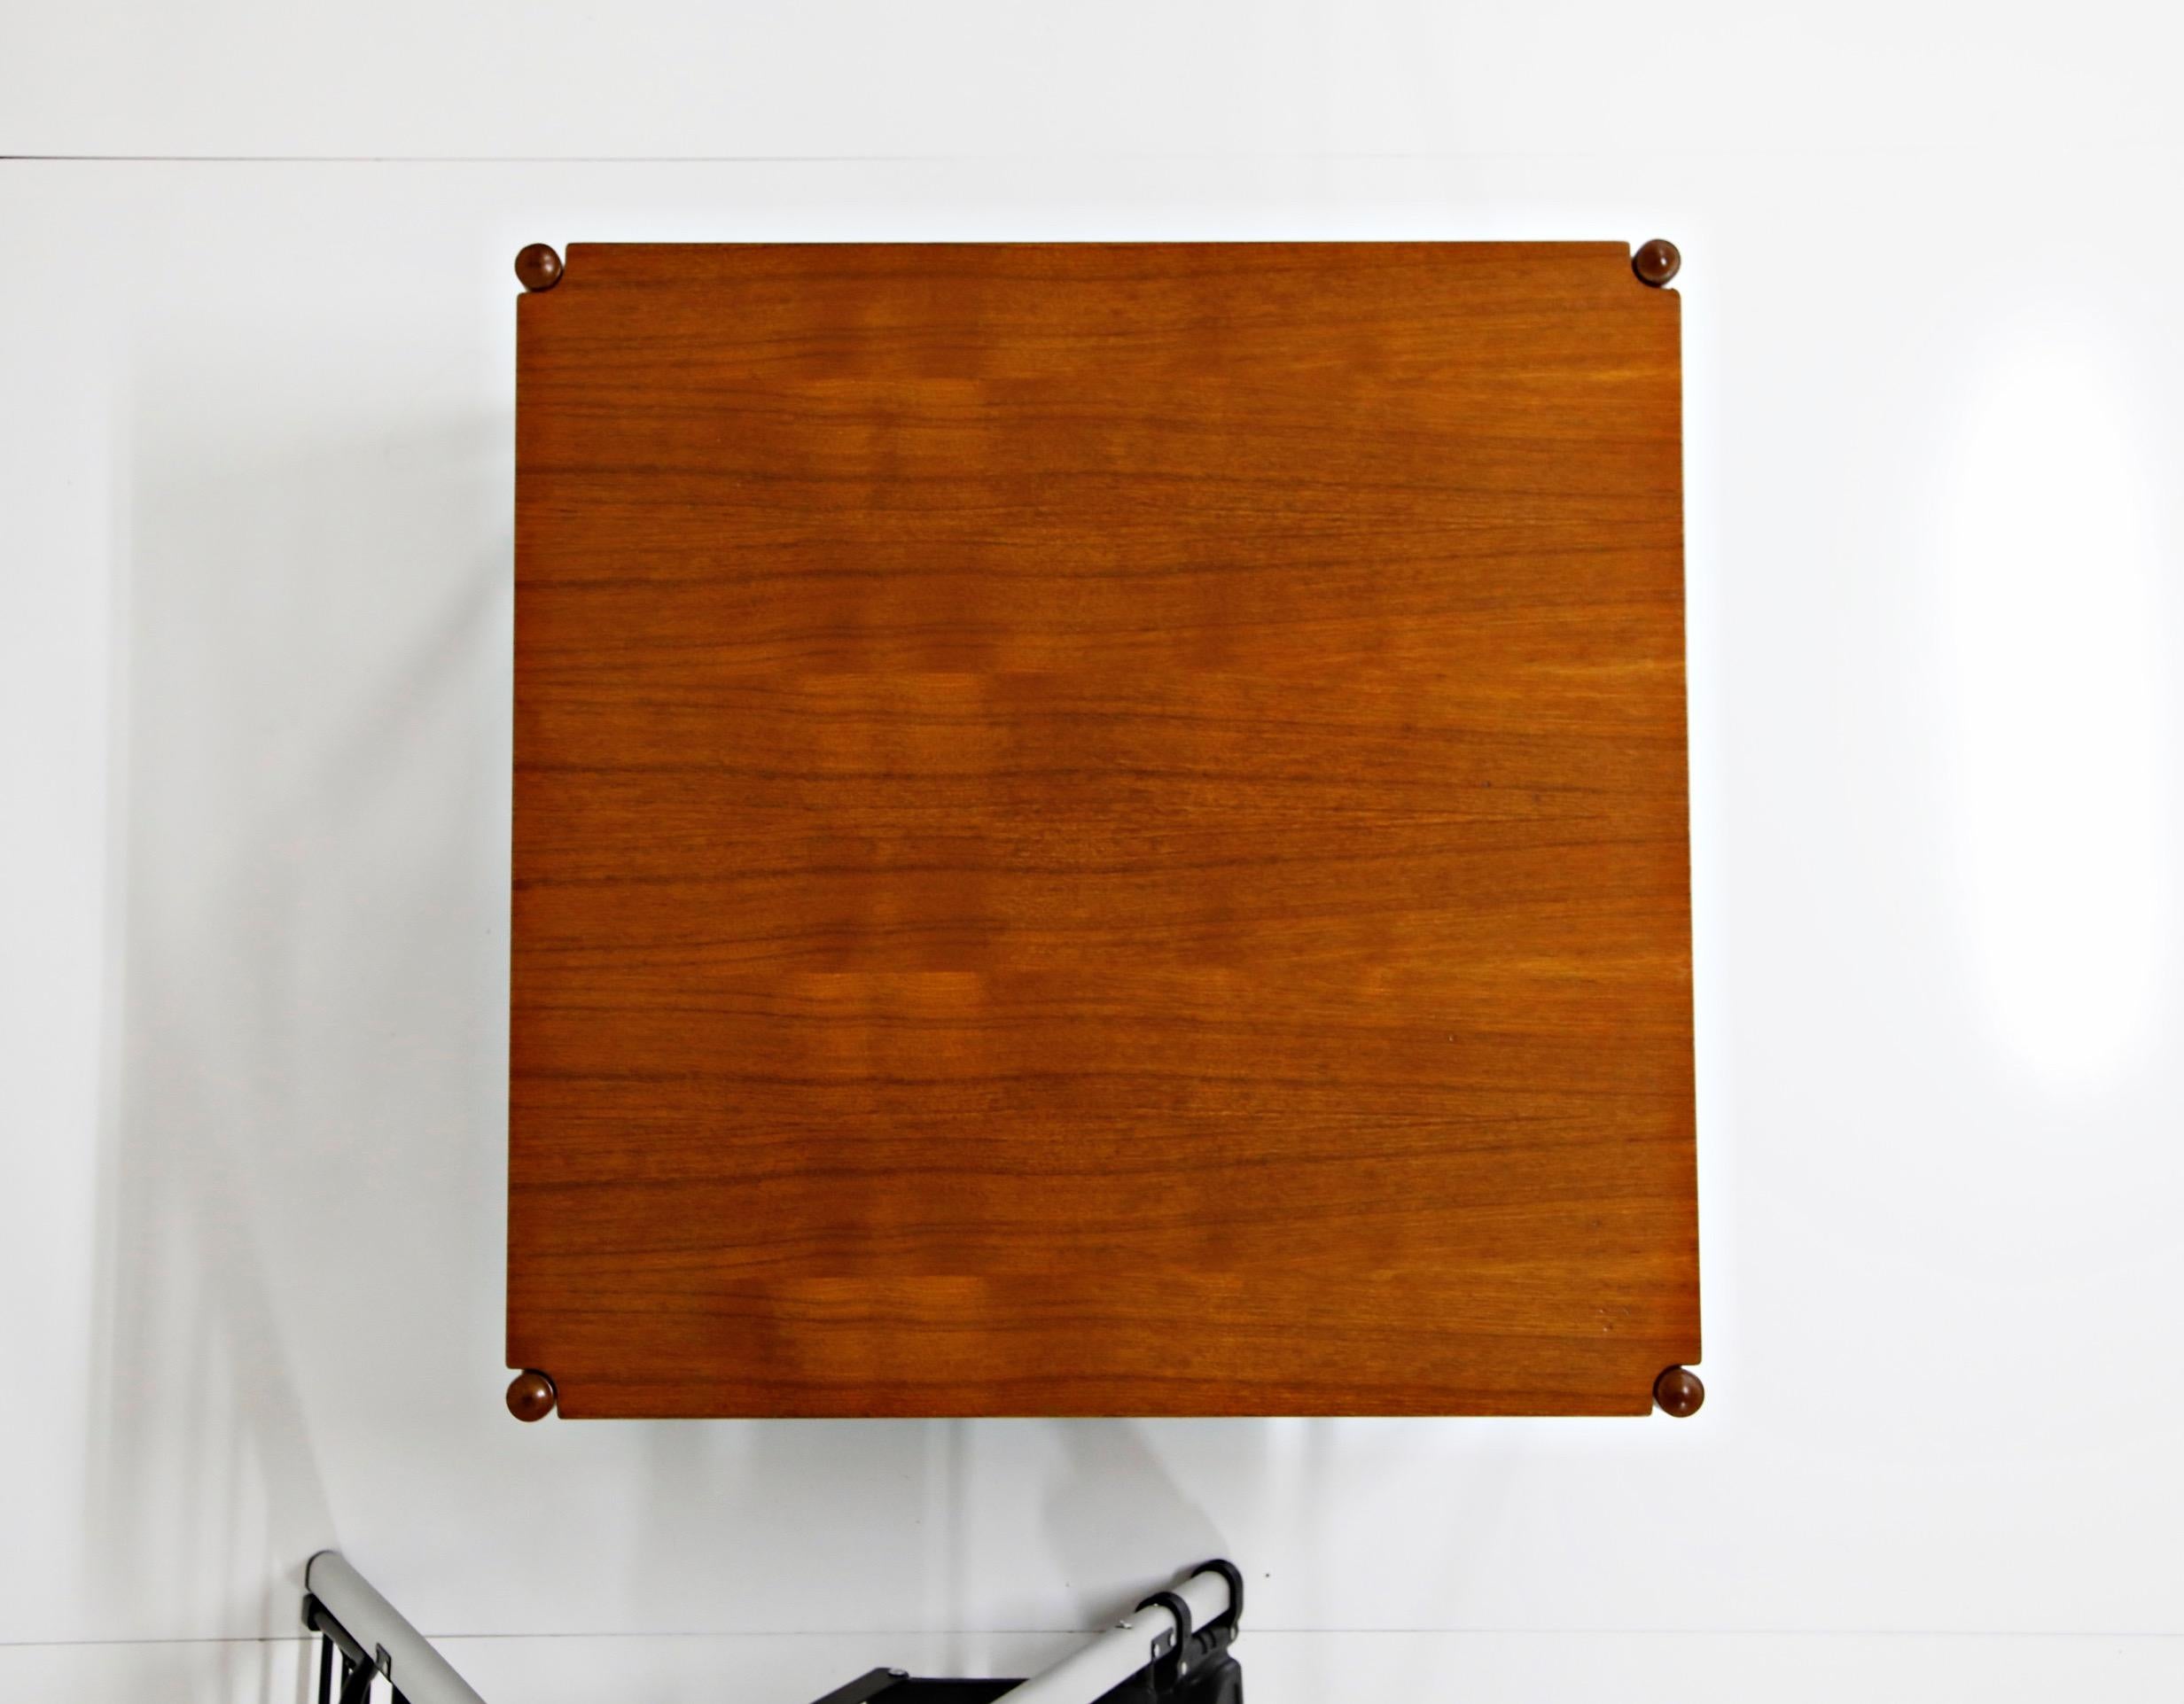 Reversible Teak & Formica Coffee Table by Ole Wanscher for Poul Jeppesen, Signed For Sale 3